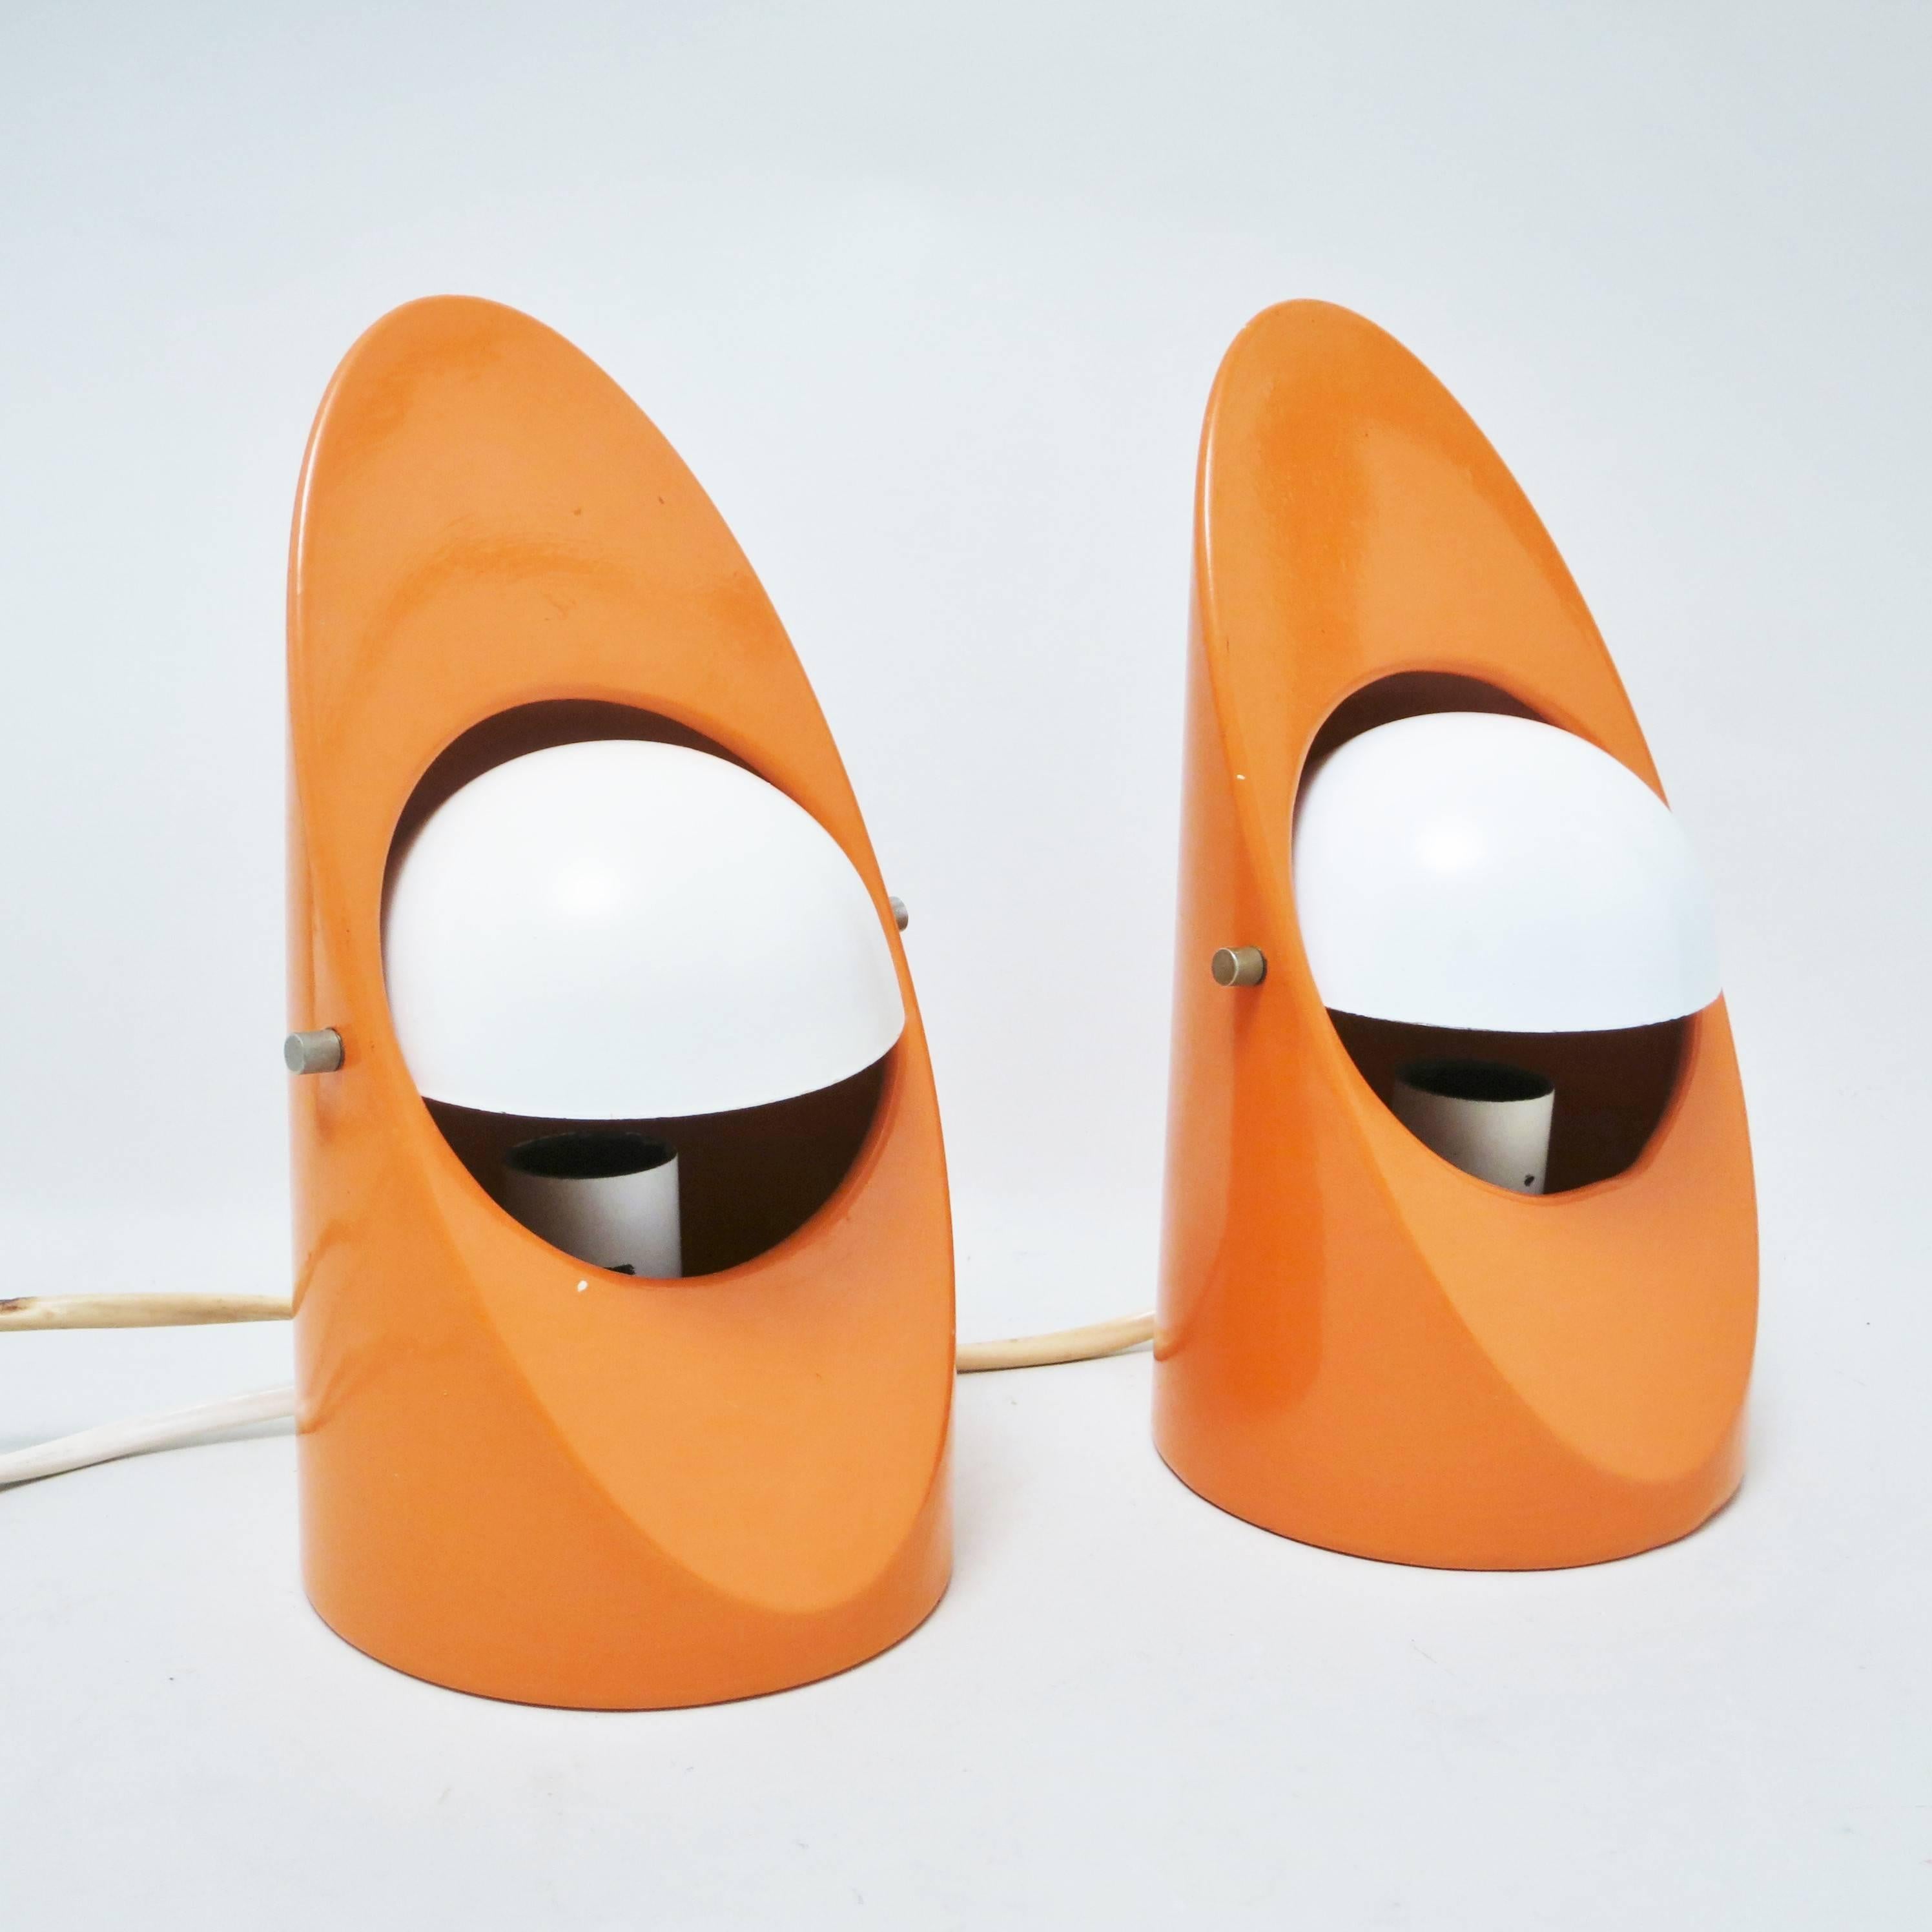 Pair of Italian Mid-Century Modern lamp in orange lacquered aluminium cast and white lacquered revolving shade in metal.